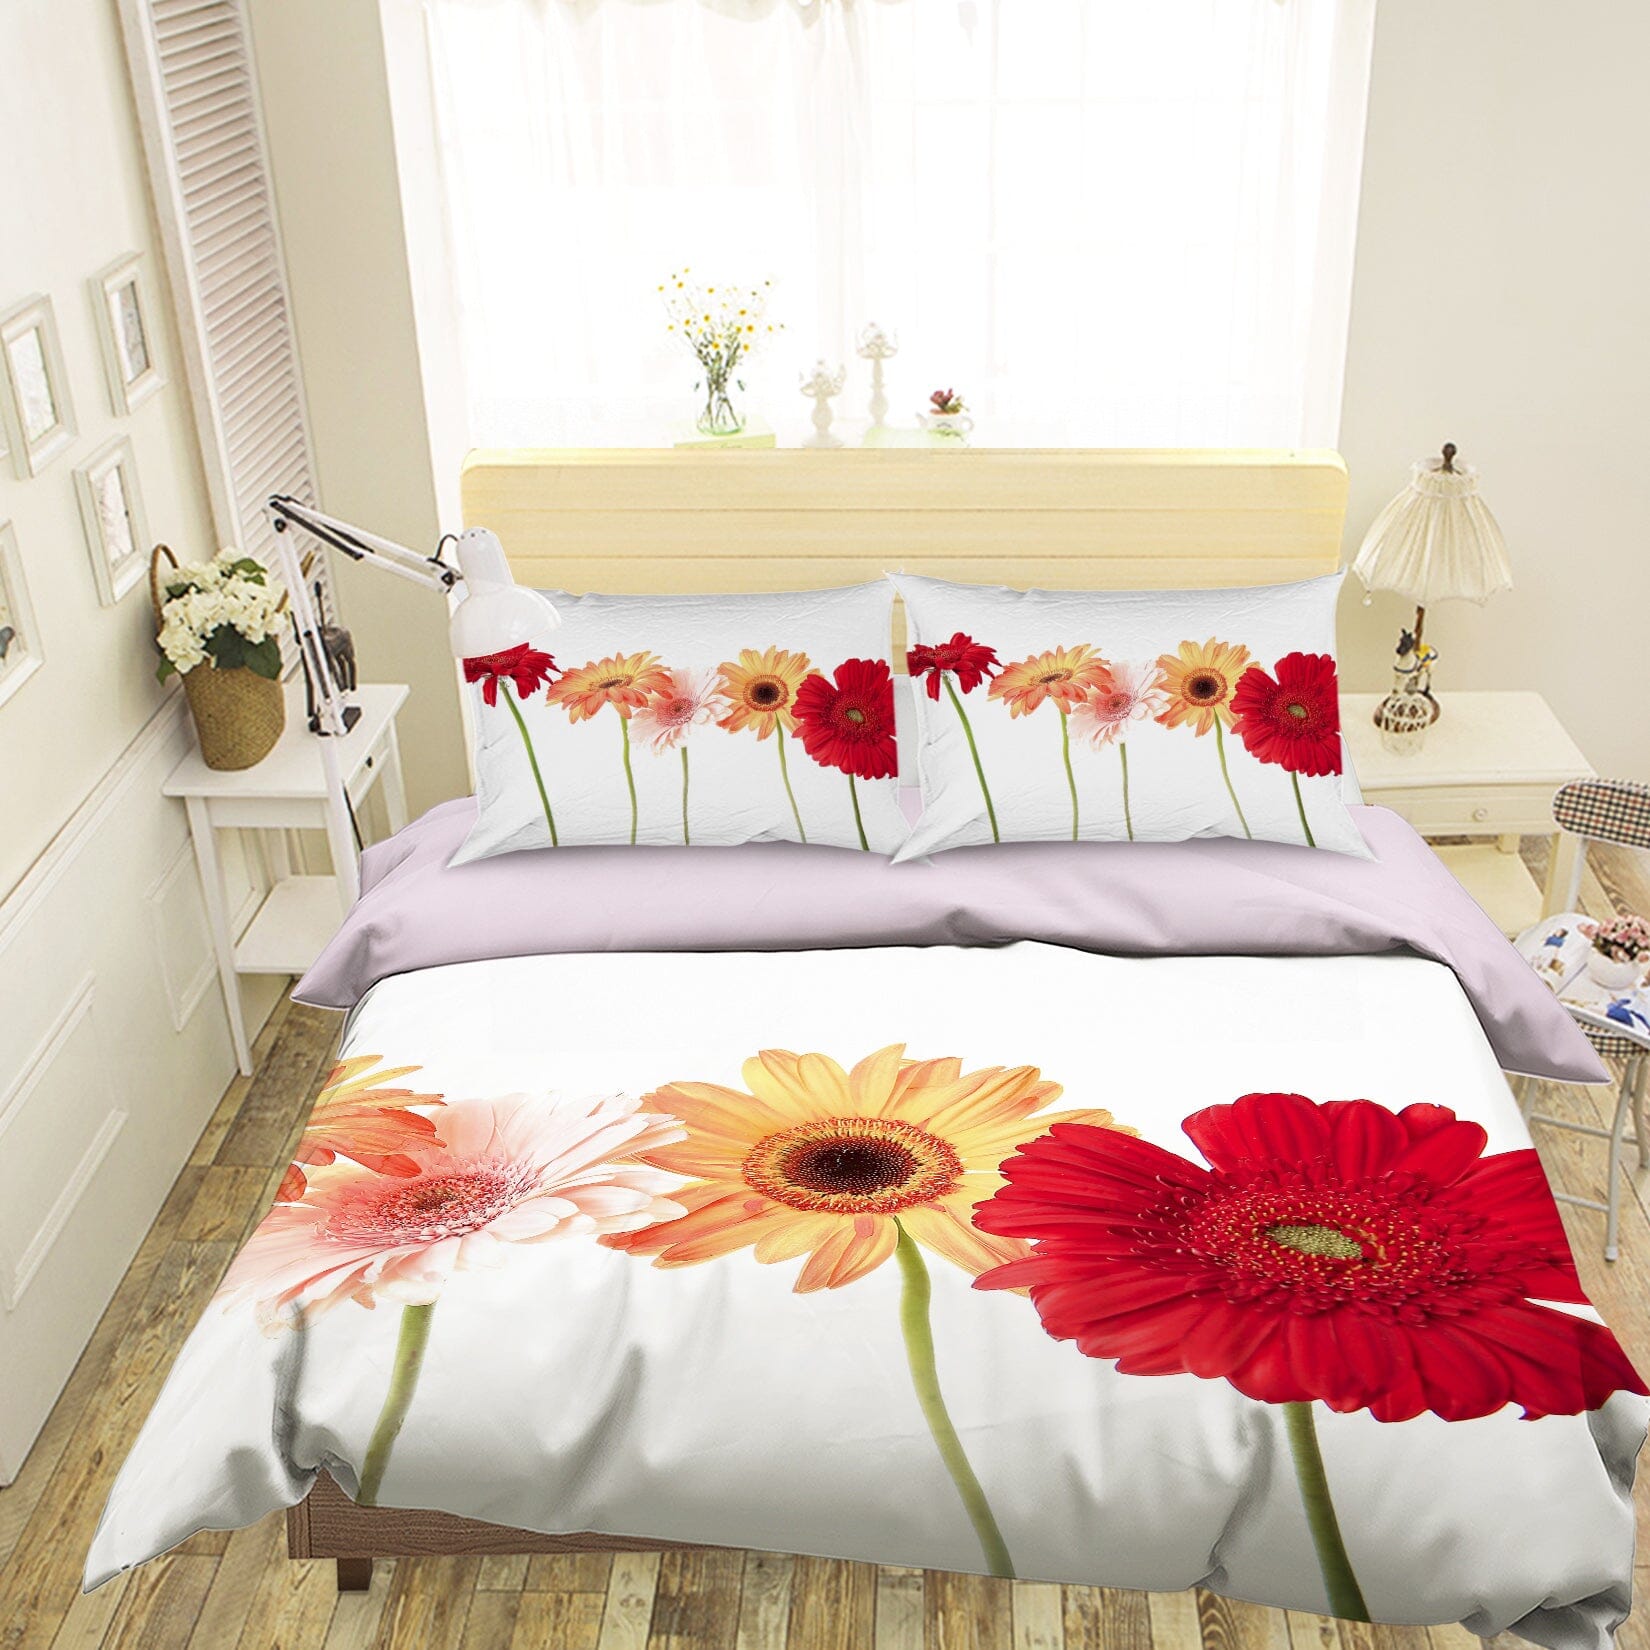 3D Gerbera 2018 Kathy Barefield Bedding Bed Pillowcases Quilt Quiet Covers AJ Creativity Home 